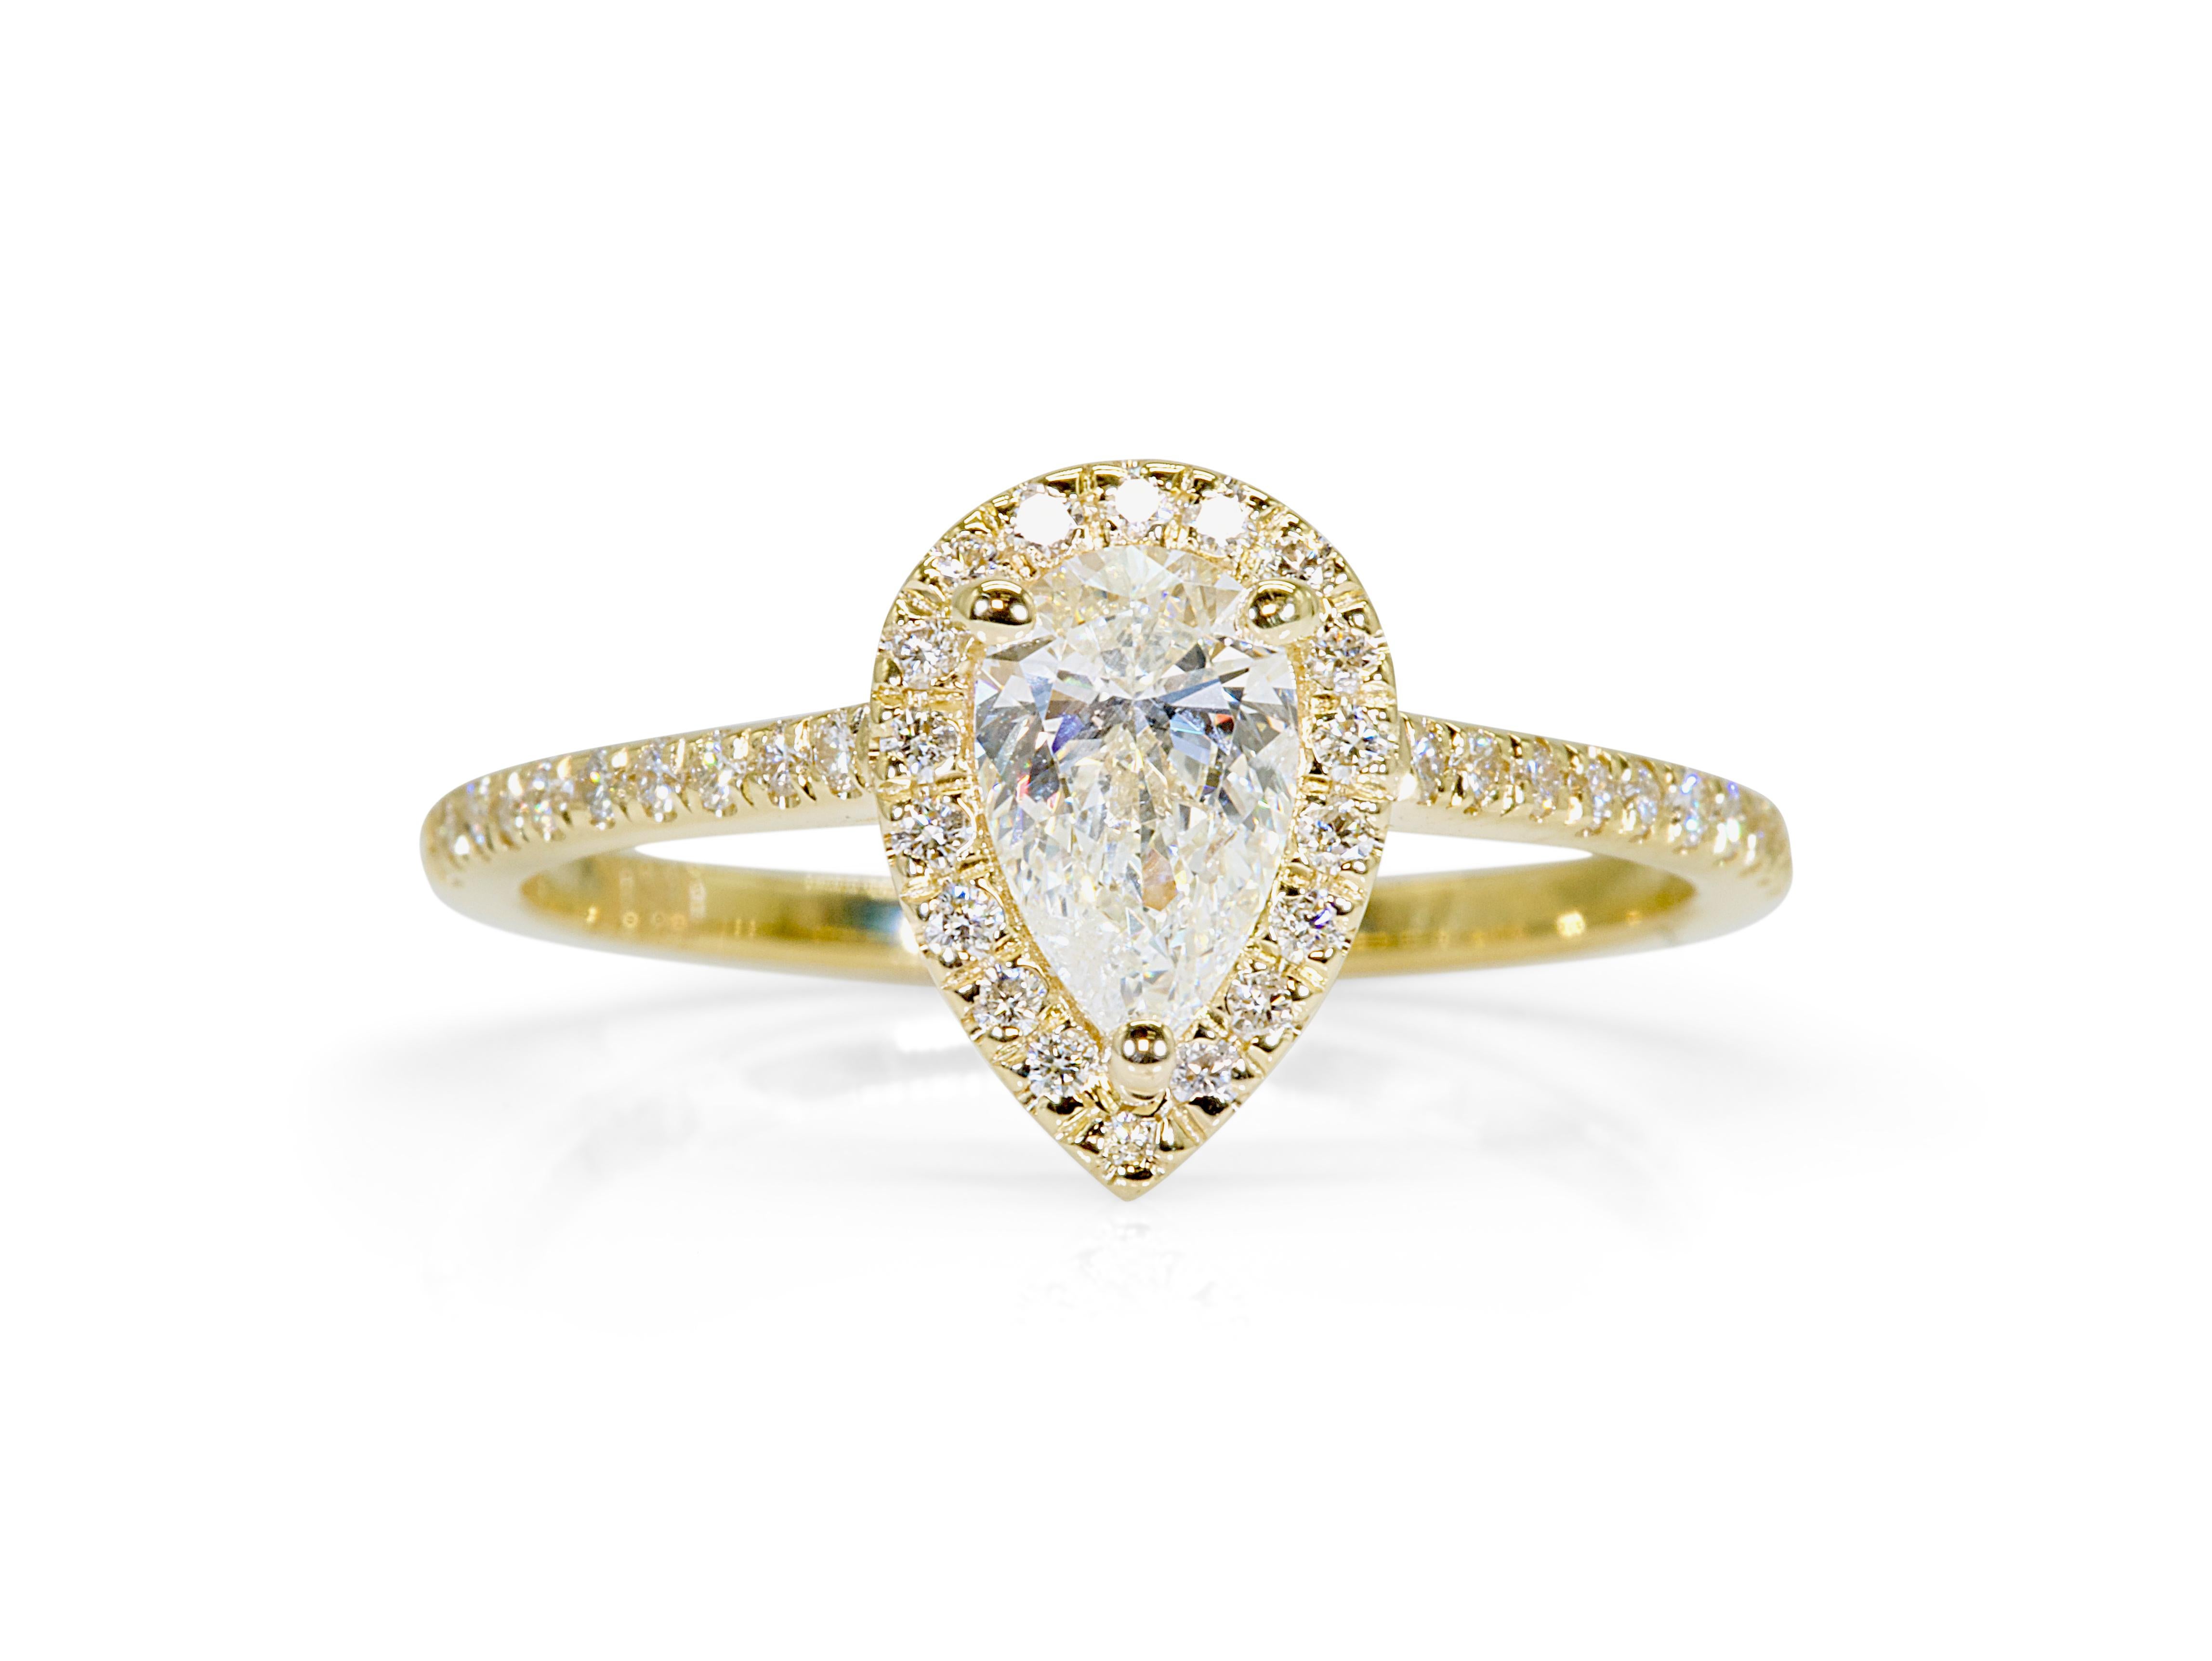 Dazzling 2.66ct Pear-Shaped Diamond Halo Ring in 18k Yellow Gold - GIA Certified

This exquisite ring in 18k yellow gold boasts a sophisticated design centered around a stunning 2.01-carat pear-shaped diamond. Complemented by additional 38 round